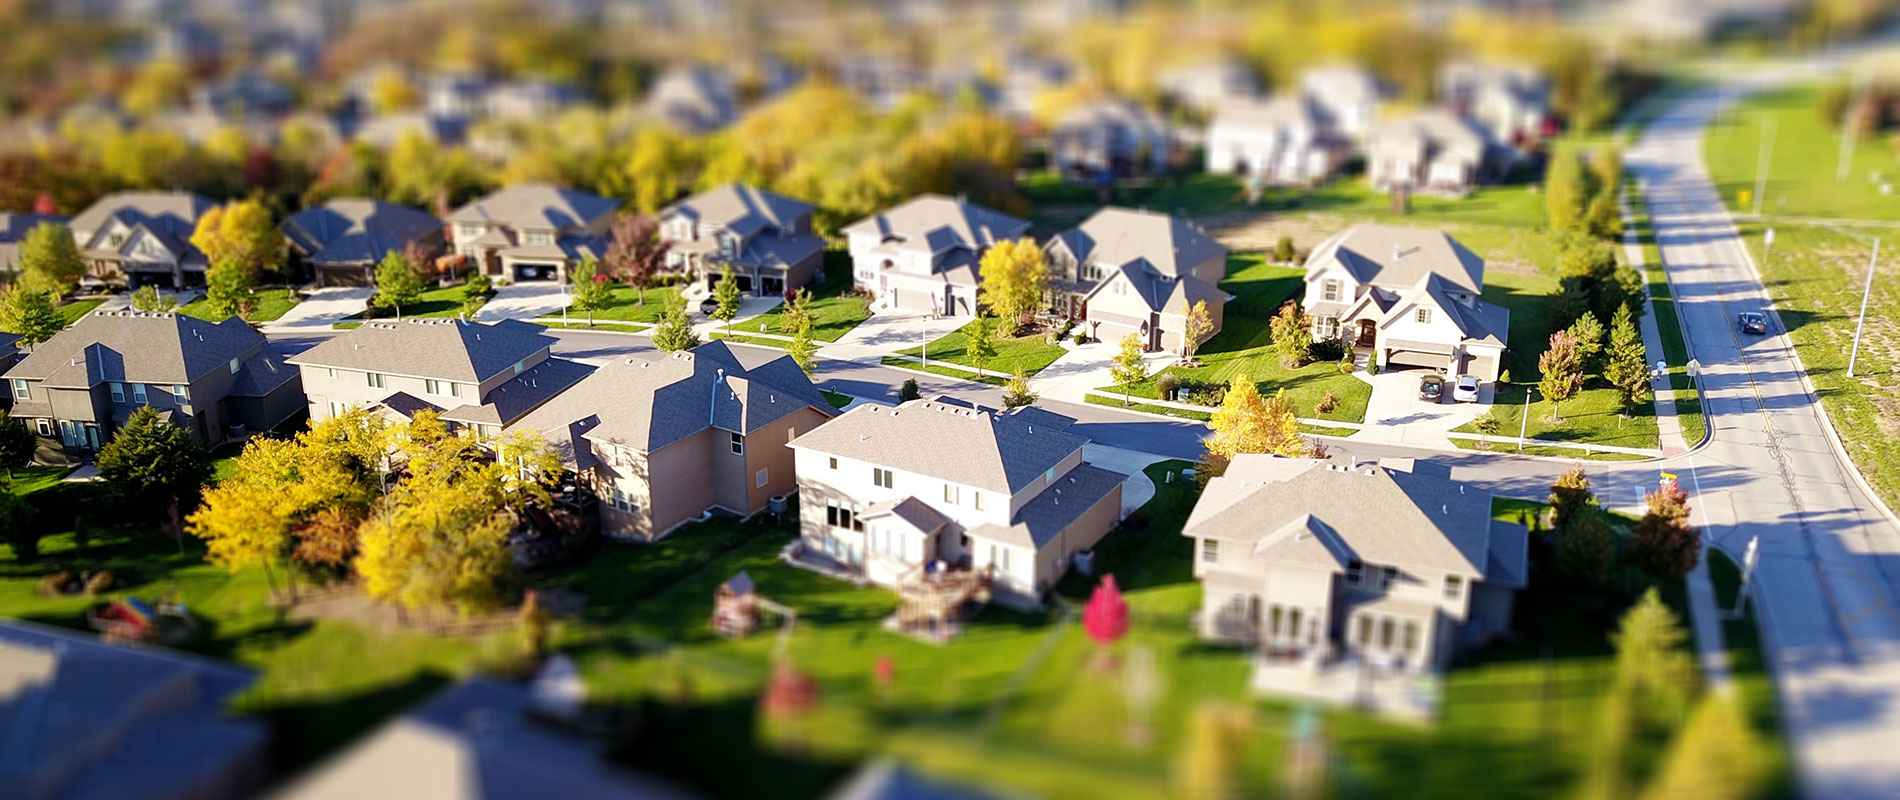 Why Invest In Real Estate?